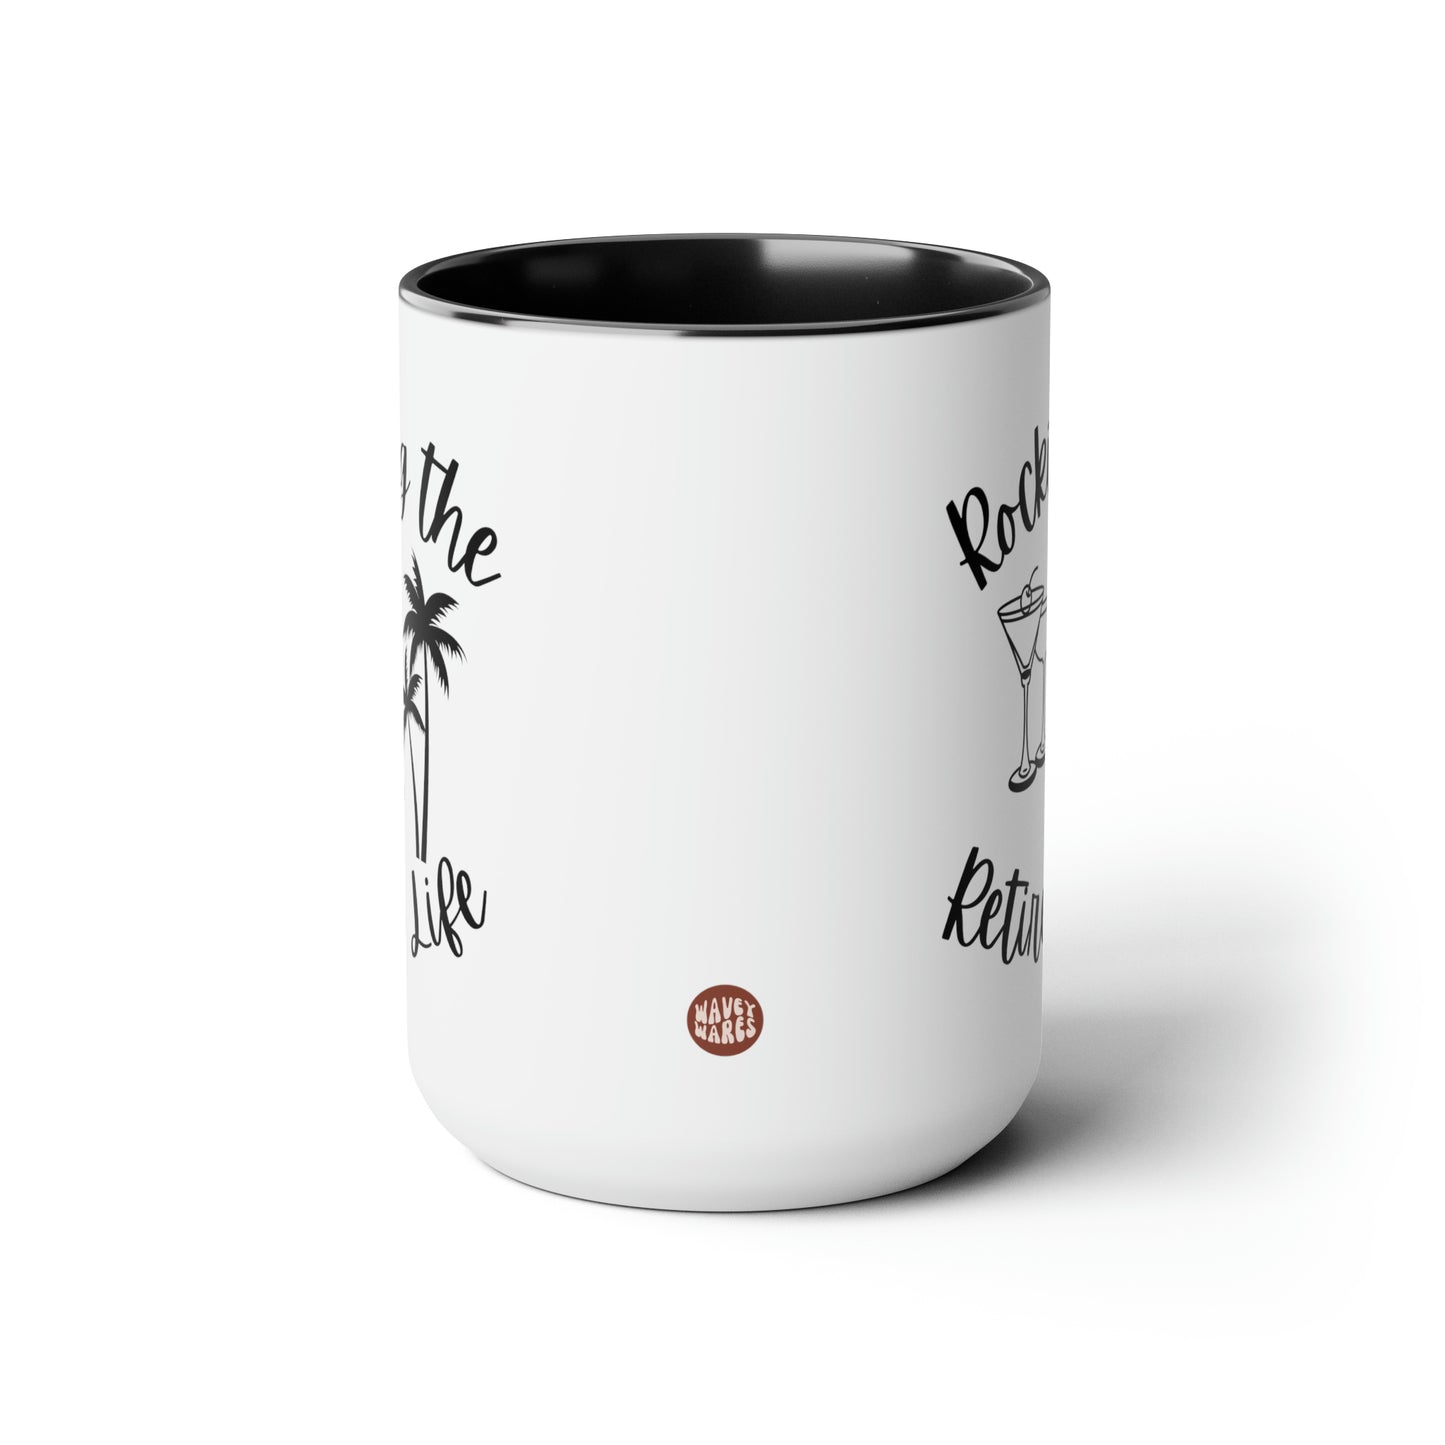 Rocking The Retired Life 15oz white with black accent funny large coffee mug gift for retirement party retiree her him waveywares wavey wares wavywares wavy wares side